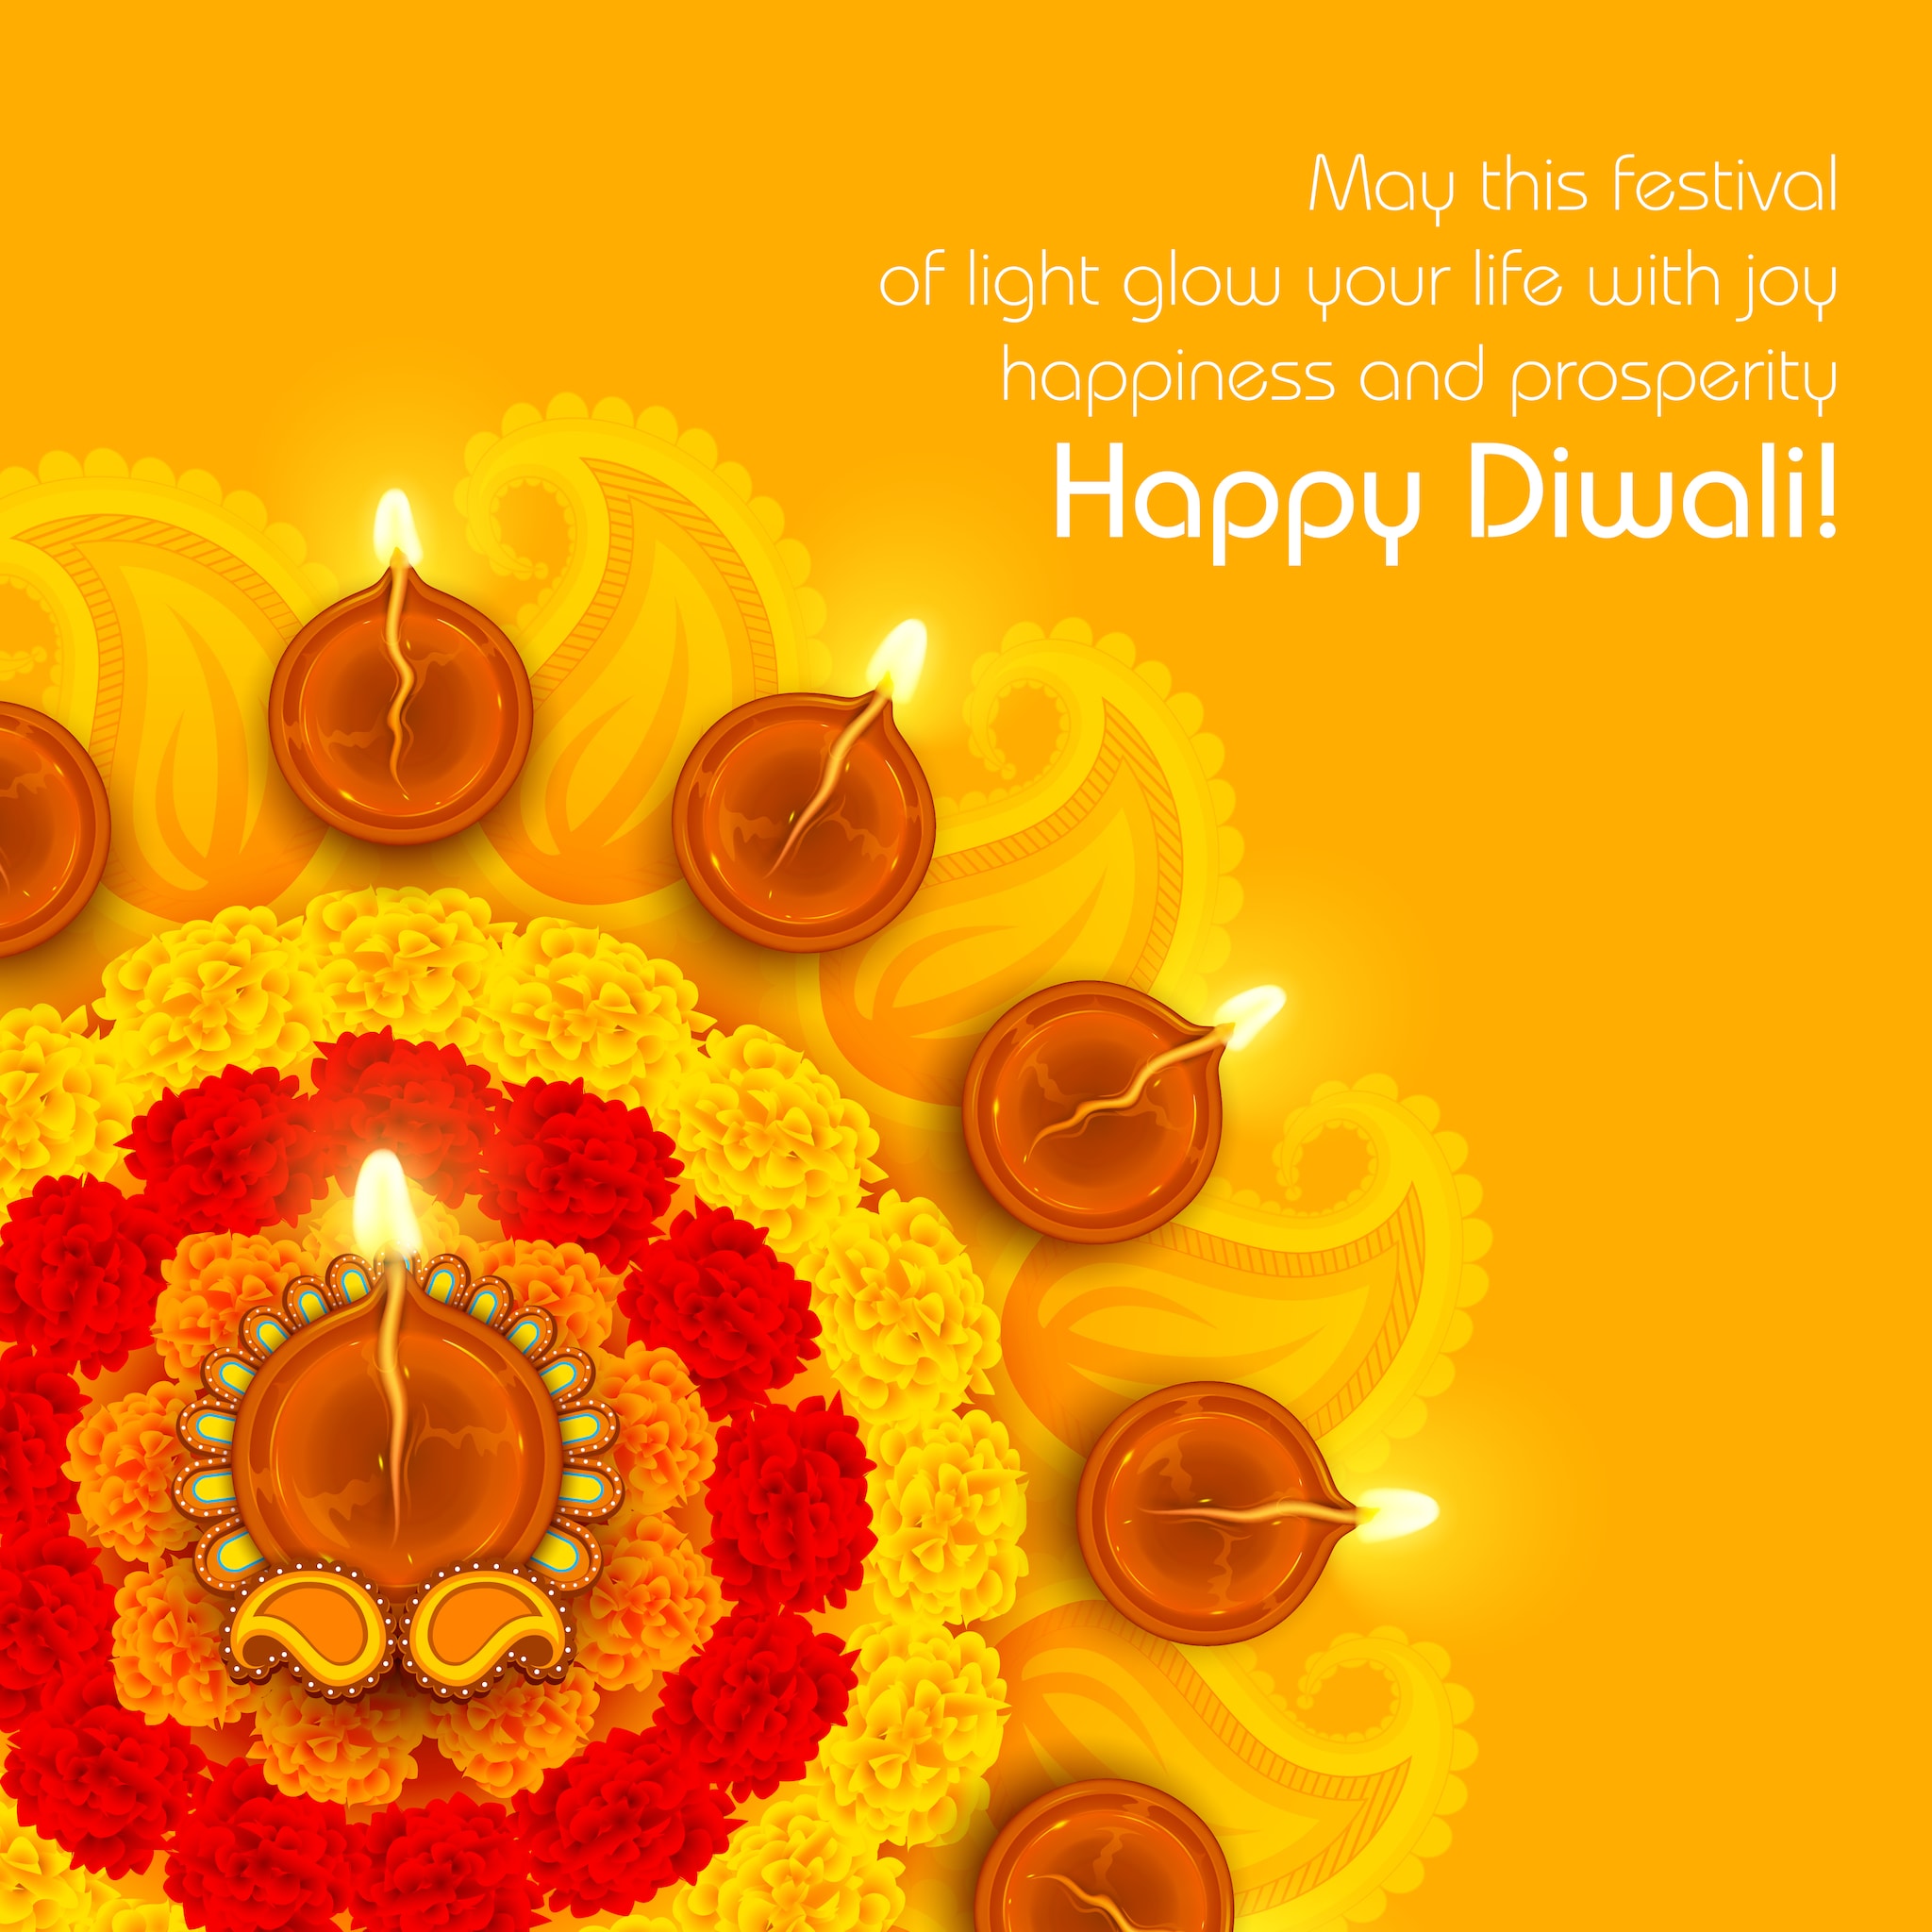 Happy Diwali 2022 Wallpaper, Wishes Images, Quotes, Status, Photos, Pics, SMS and Messages to share. (Image: Shutterstock) 